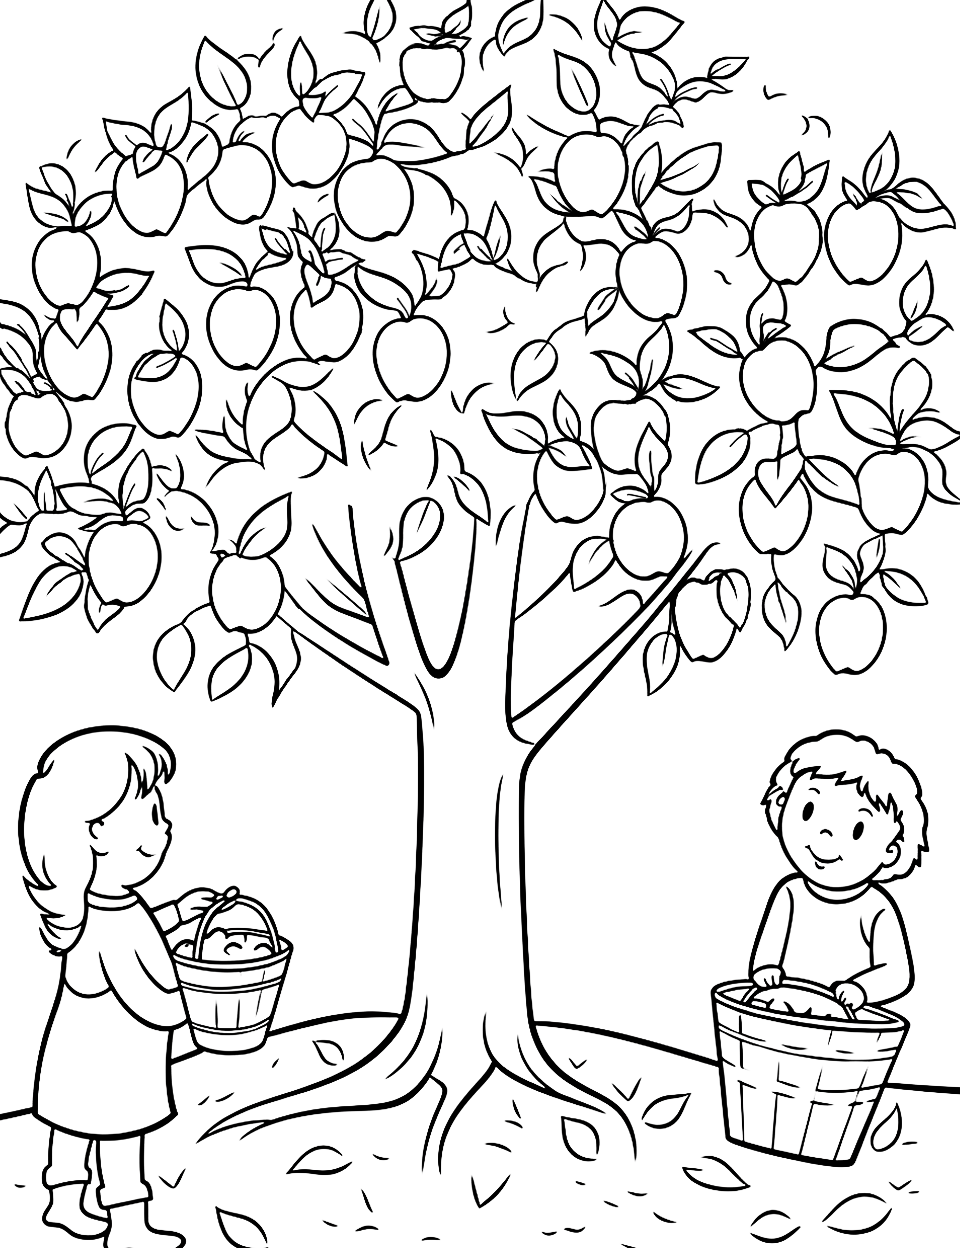 25 Fall Coloring Pages: Free Printable ...